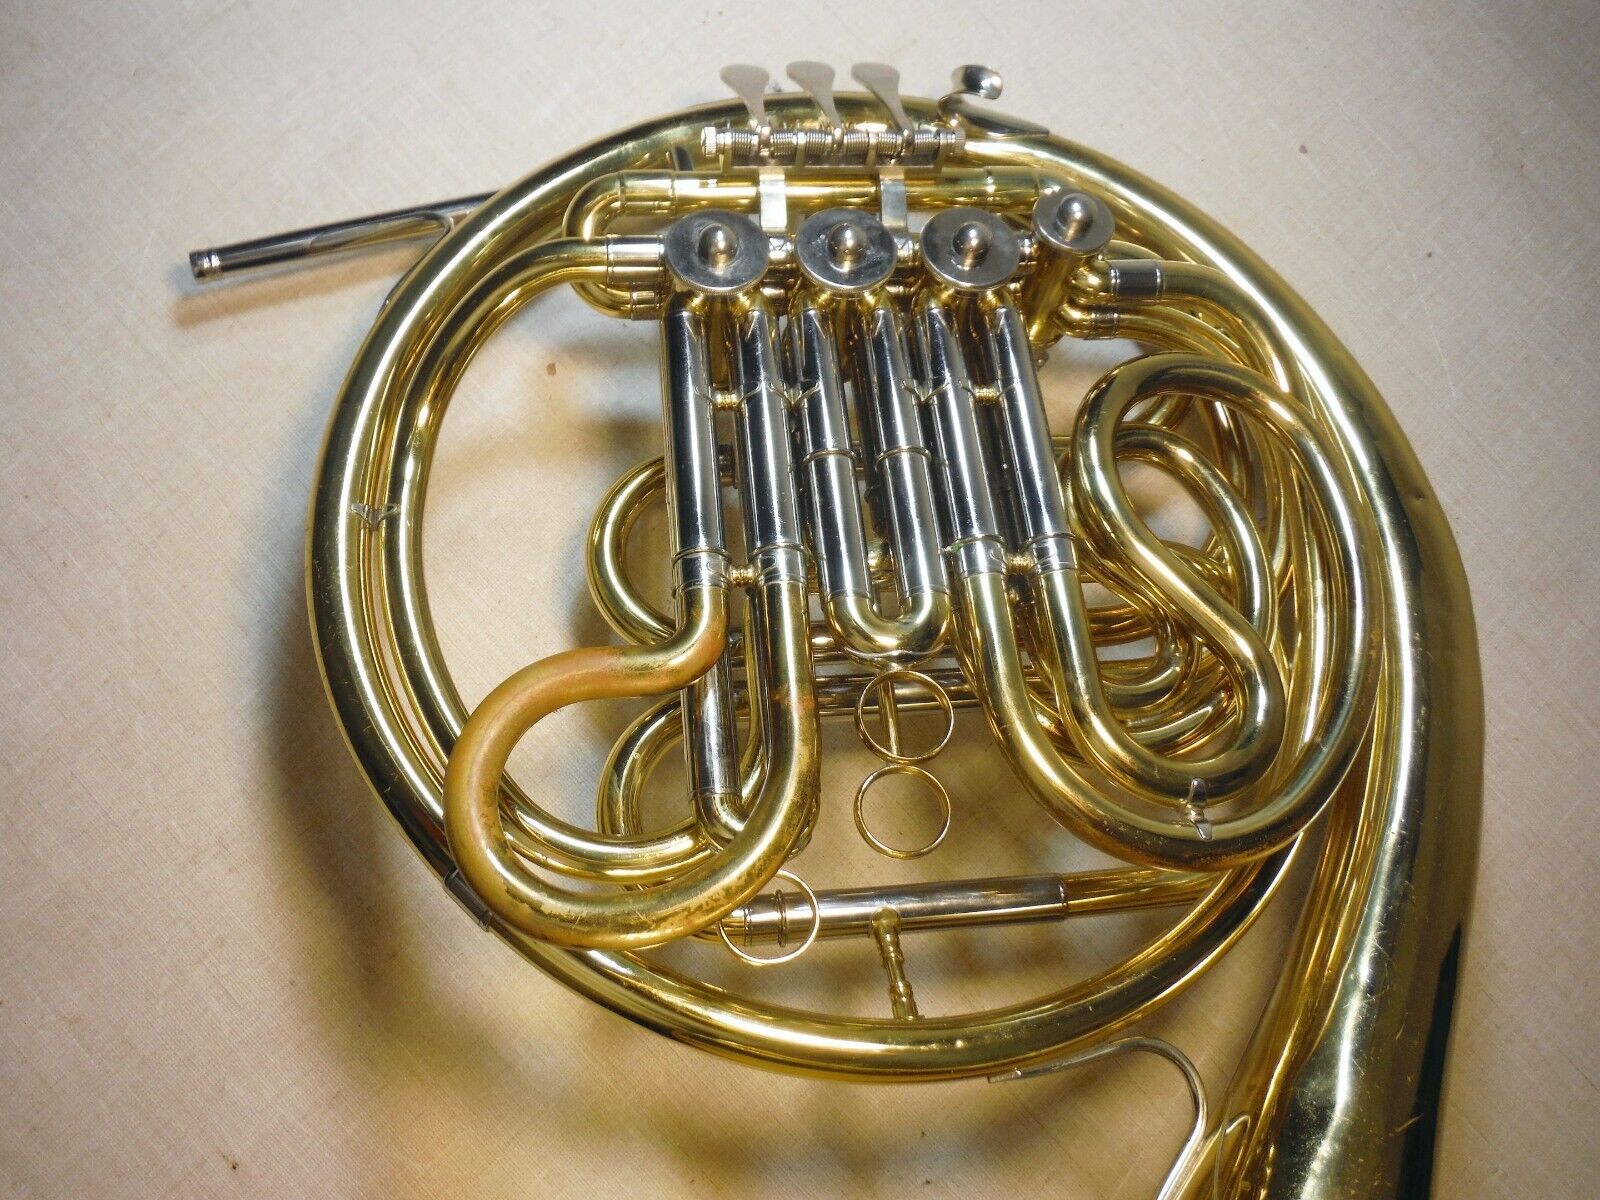 JUPITER JHR-852 DOUBLE FRENCH HORN BRASS WORKING GOOD W/DENTS CASE MOUTHPIECE 5